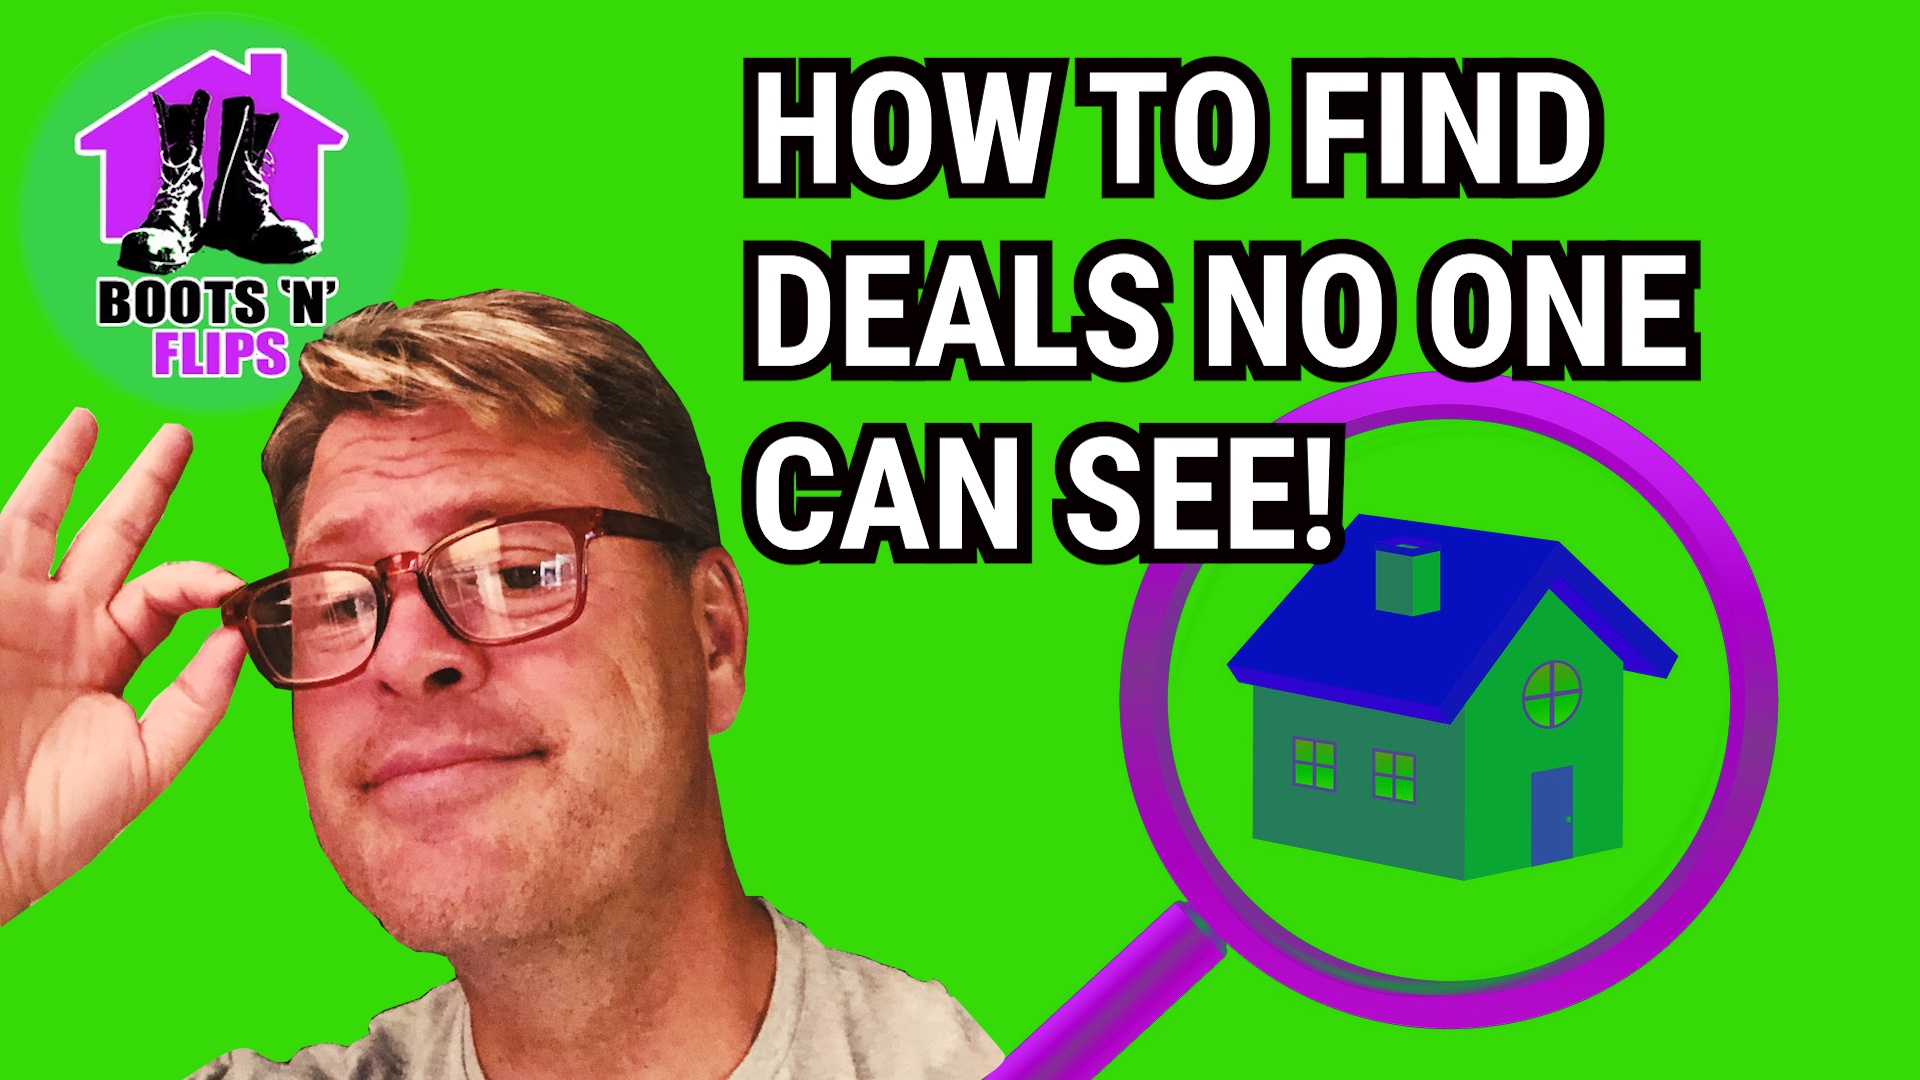 How to Find Deals No One Can See_ThumbnailRevised2